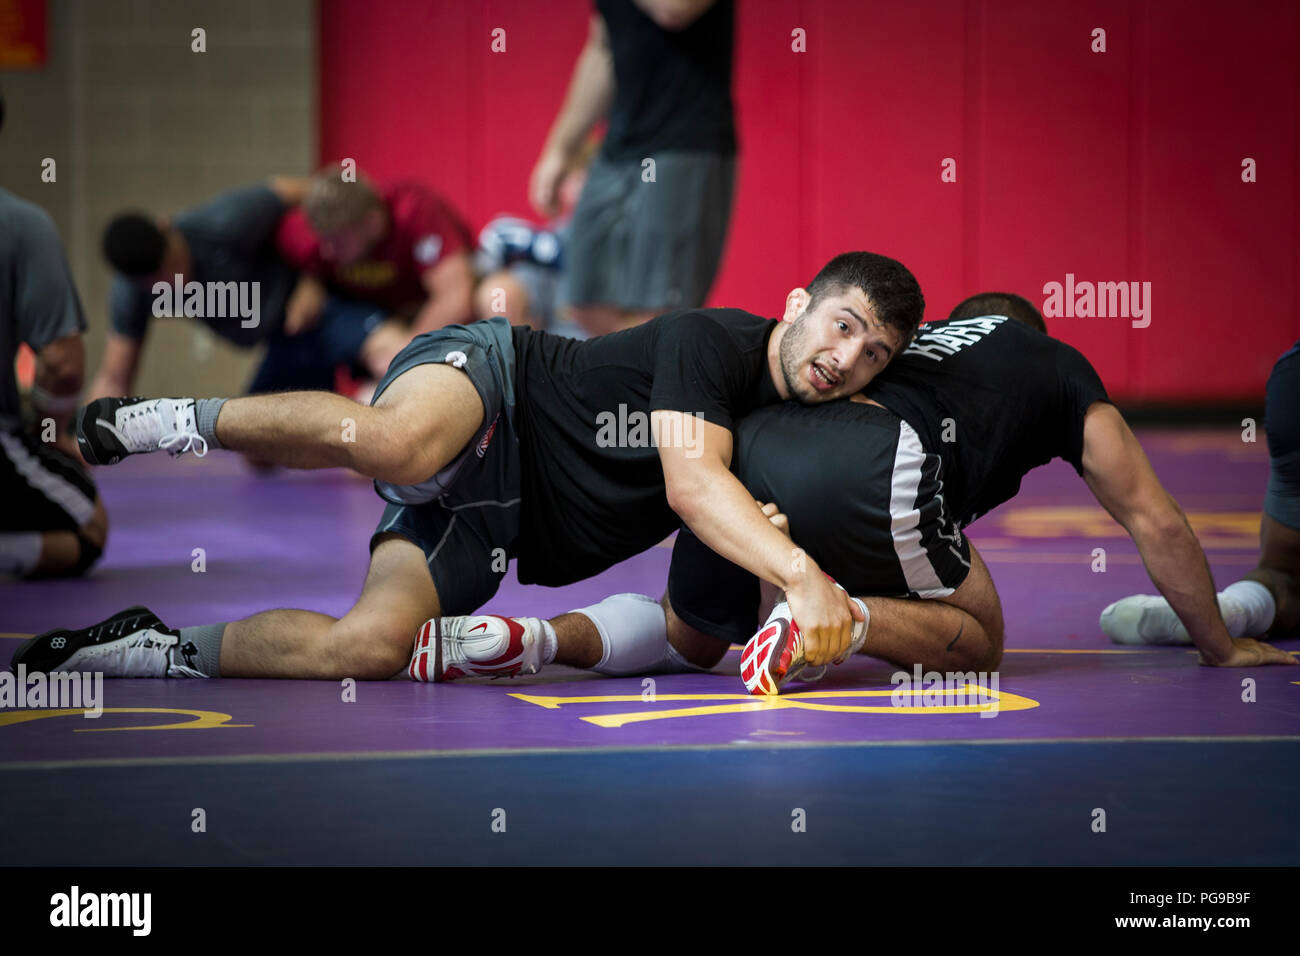 Isaiah Martinez, left, wrestler, USA Wrestling Men’s Freestyle World Team, attempts to subdue his training partner at the 43 Fitness Center at Marine Corps Base Camp Pendleton, California, Aug. 20, 2018. Prior to training the wrestlers warm-up, which included a series of roles, work-outs and stretches, helped them maintain flexibility and avoid potential injuries caused by tight muscles. (U.S. Marine Corps photo by Lance Cpl. Betzabeth Y. Galvan) Stock Photo